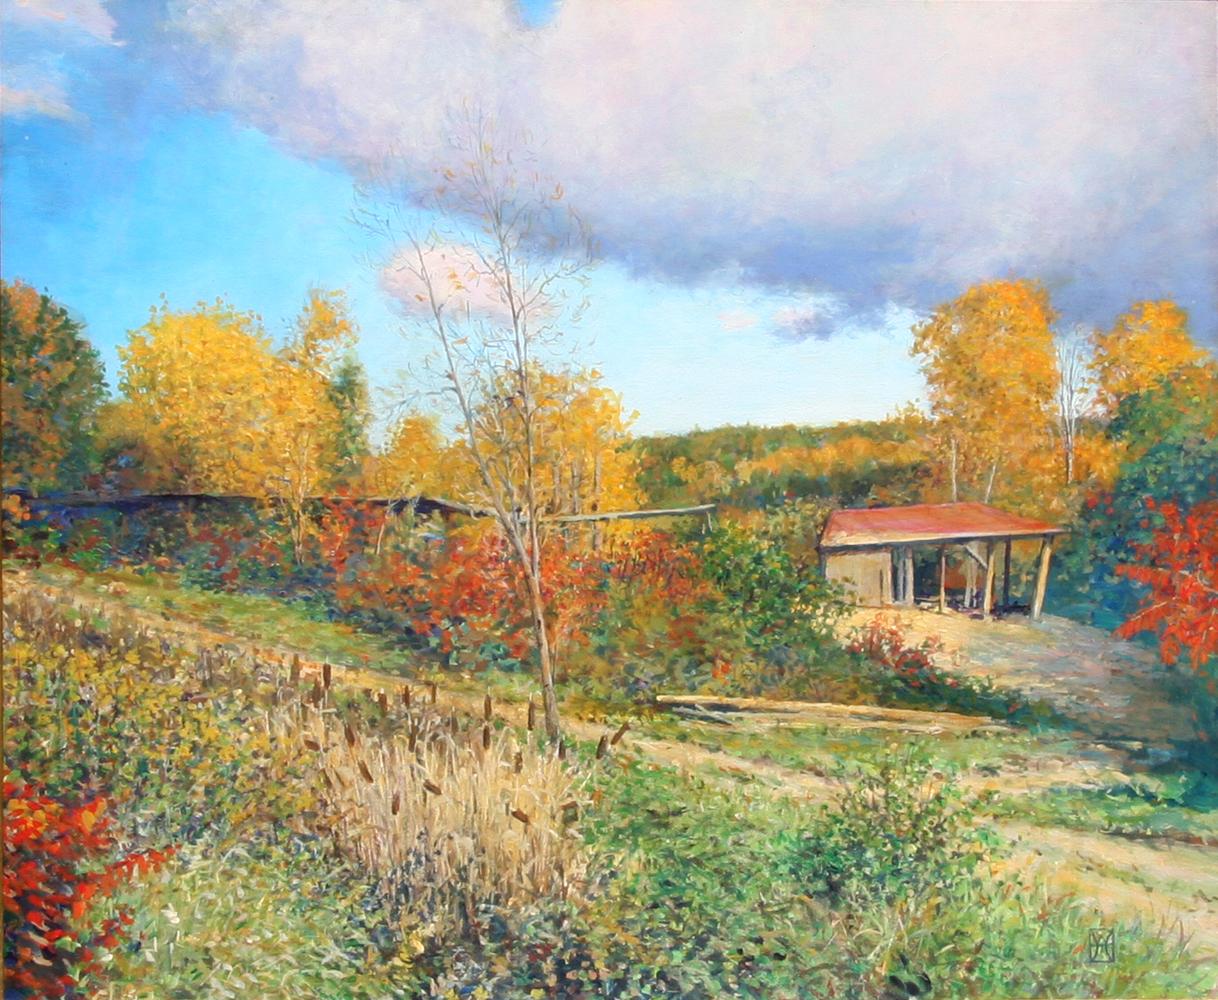 ""The Old Sawmill at Westminster, Vermont", von Wally Ames